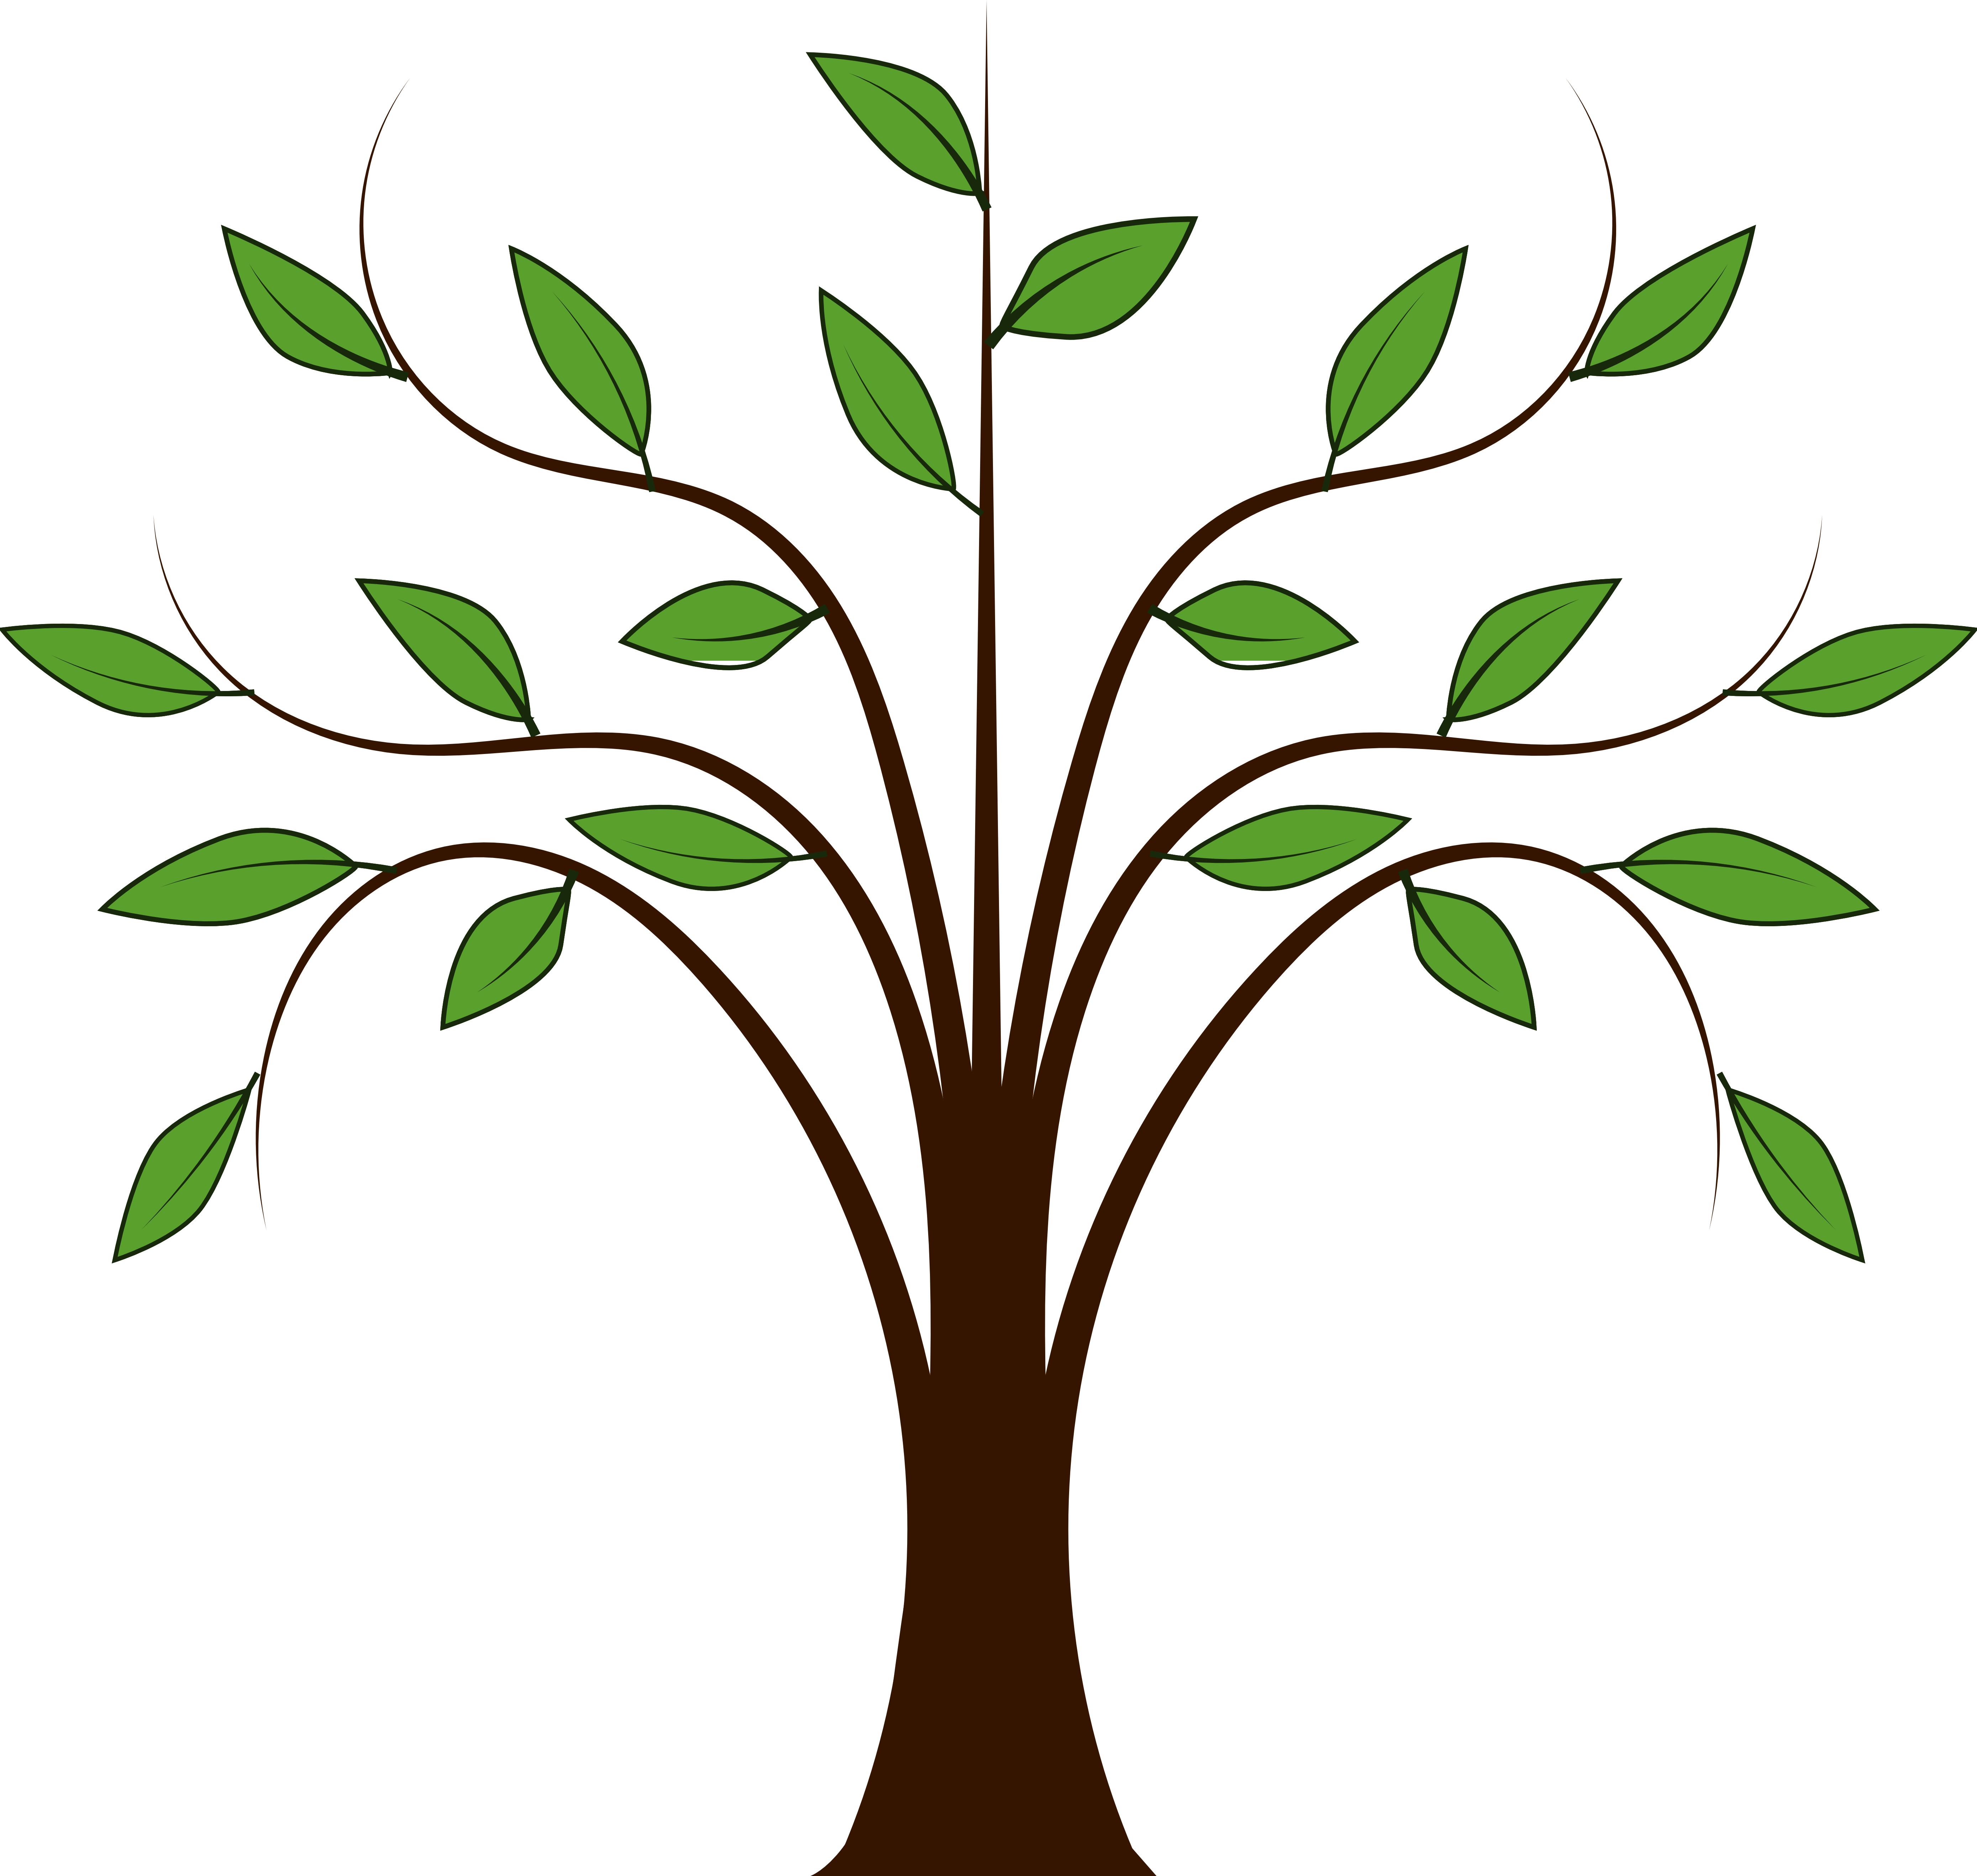 Free Clipart Outline Of A Tree With Roots And Branches - ClipArt Best